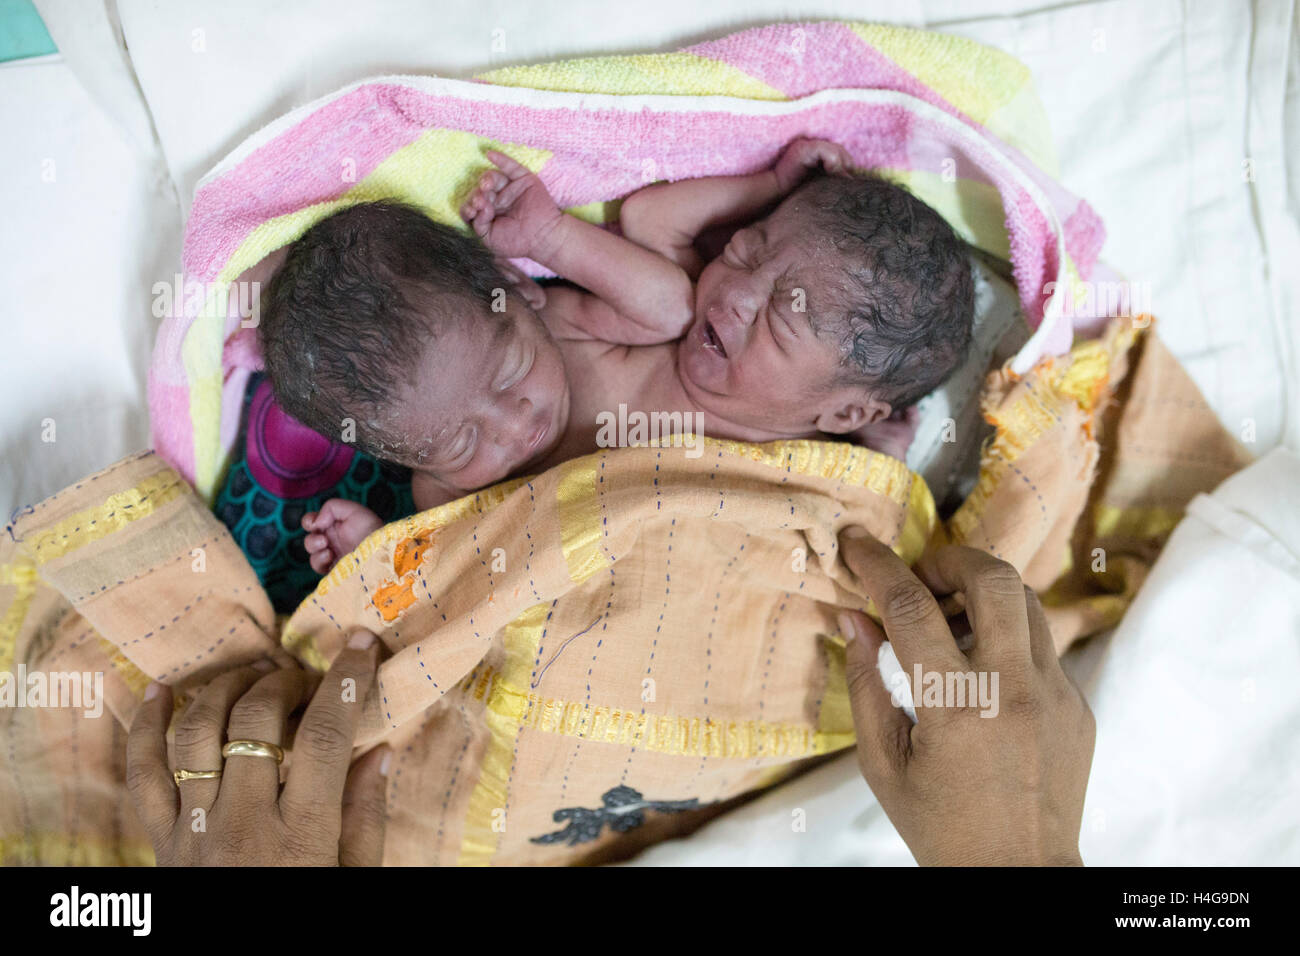 Dhaka, Bangladesh. 15th October, 2016. Parents were allegedly abandoned the conjoined twins at the Dhaka Medical College Hospital in Dhaka, Bangladesh, on October 15, 2016.  DMCH (Dhaka Medical College Hospital) Deputy Director Khaja Abdul Gafursaid, 'The kids, with two heads, four hands and two legs, were born in an unknown clinic in Dhaka and were taken to the DMCH on Friday night. Later, their parents fled leaving the twins at the infant ward.” Credit:  zakir hossain chowdhury zakir/Alamy Live News Stock Photo